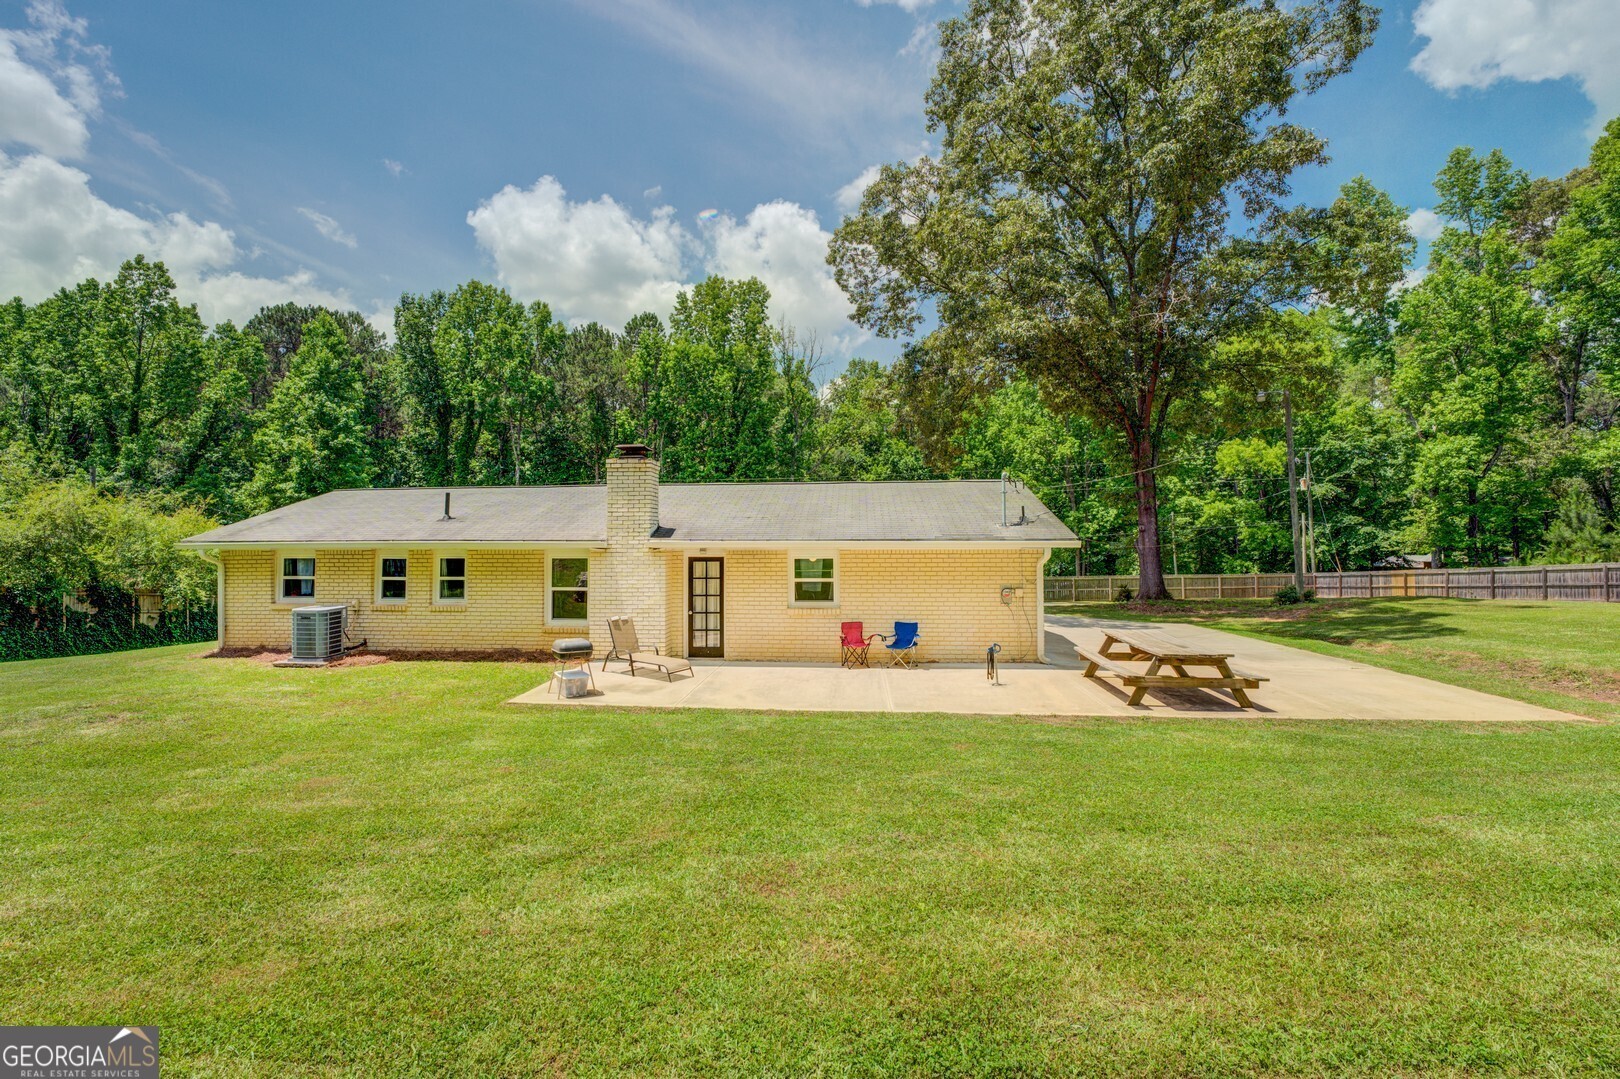 33. 760 Twin Pines Road